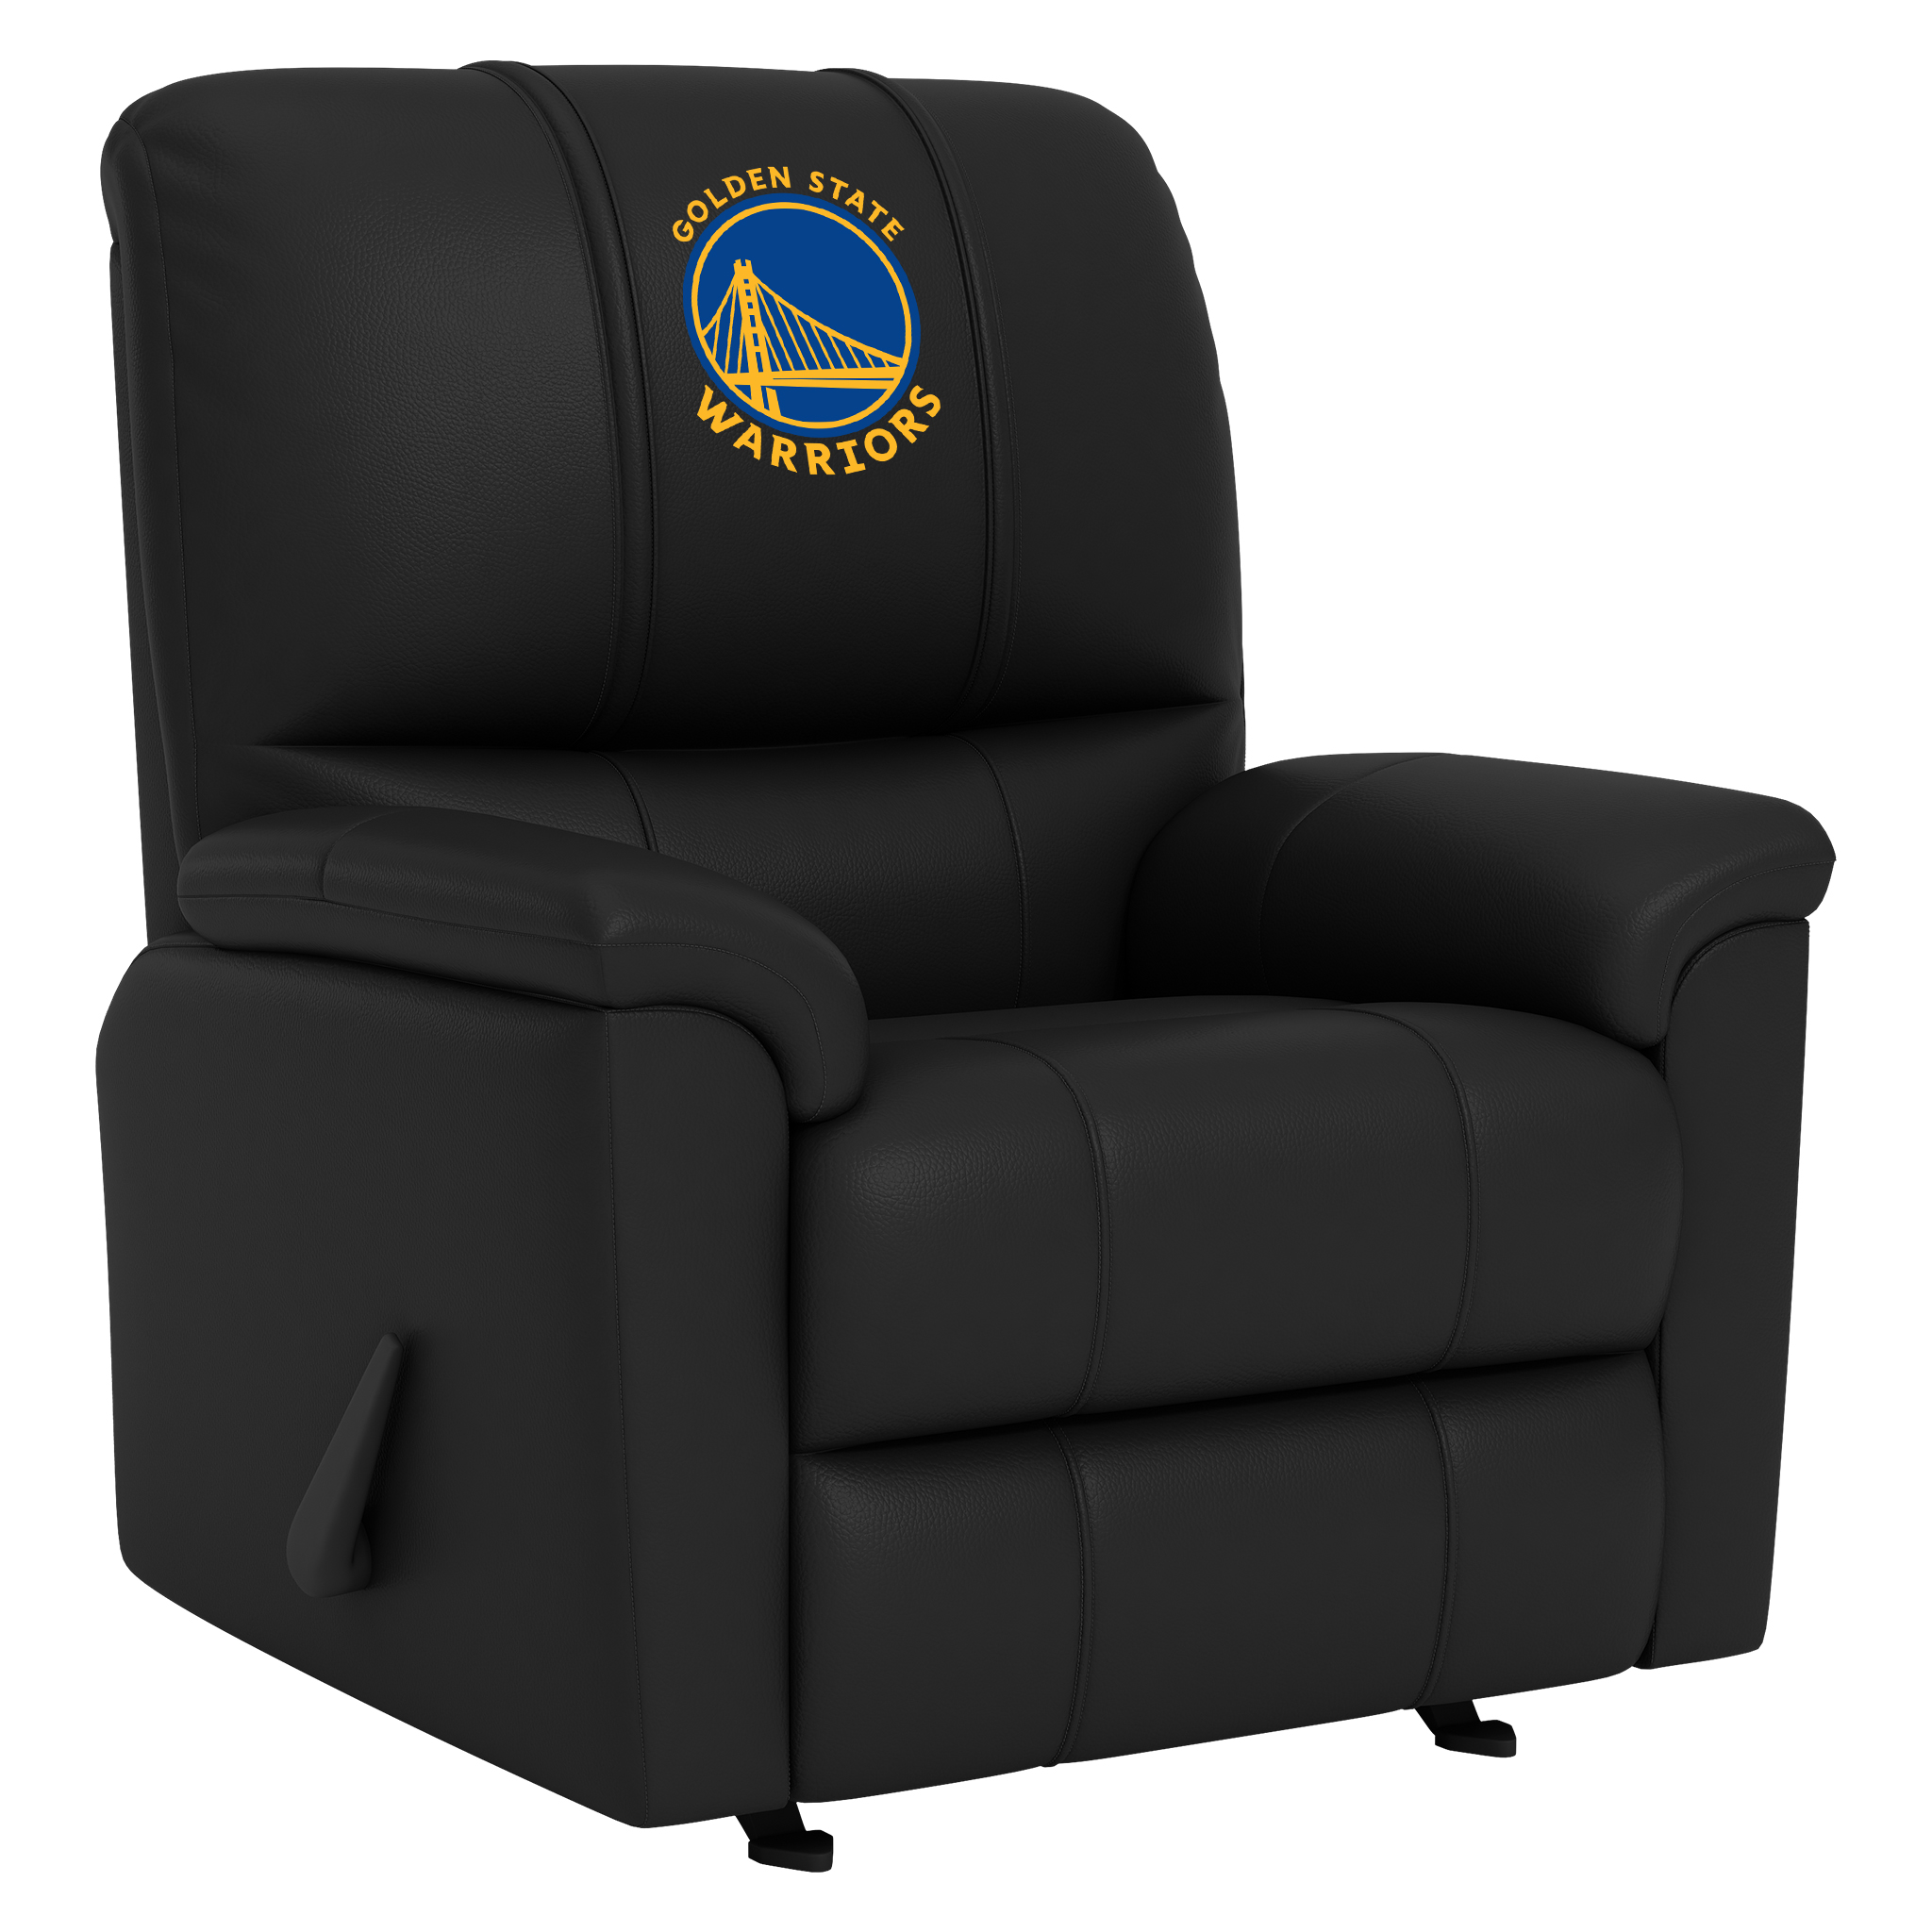 Cleveland Cavaliers Silver Club Chair with Cleveland Cavaliers Logo